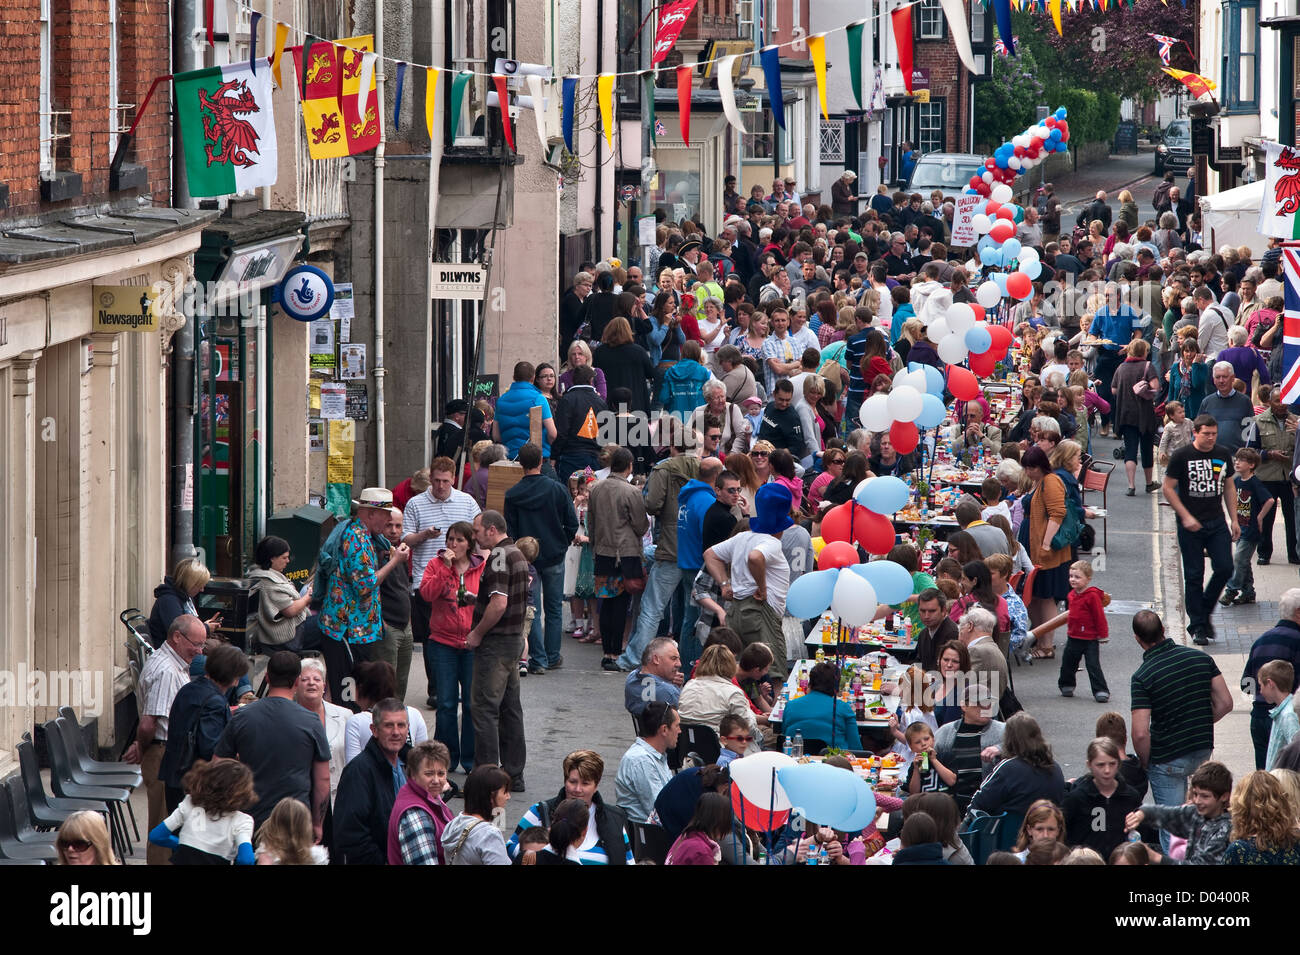 A street party in a small Welsh town, to celebrate the wedding of Prince William and Kate Middleton on the 29th April 2011 (Presteigne, Powys, UK) Stock Photo